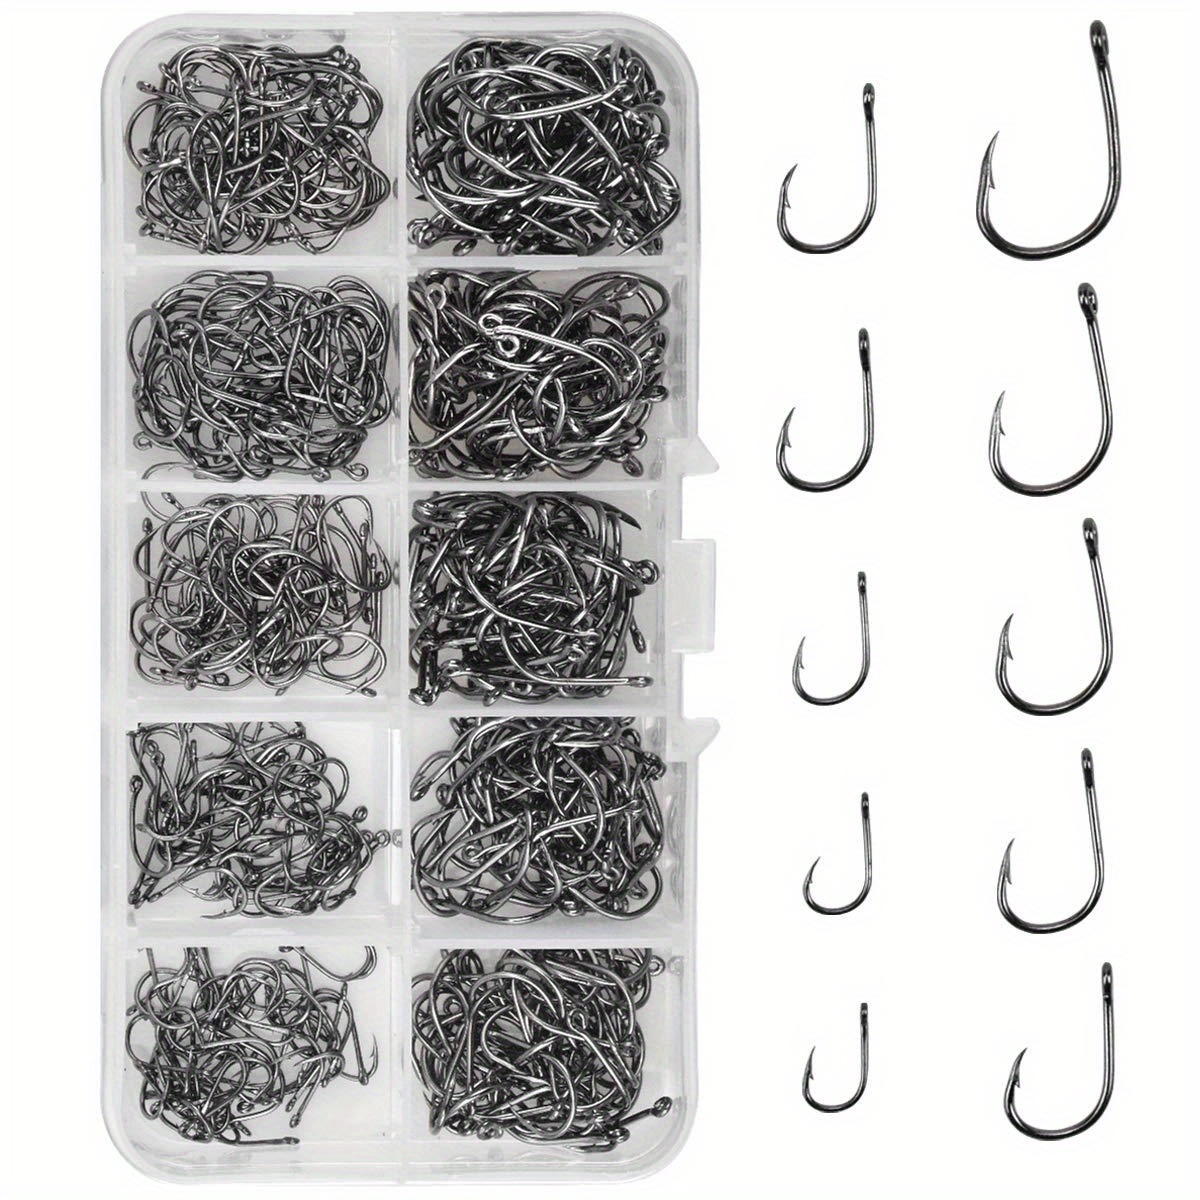 

500pcs Barbed Hook With Eye, Carp Fishing Hooks, Fishing Tackle For Saltwater Freshwater, With Compartment Box